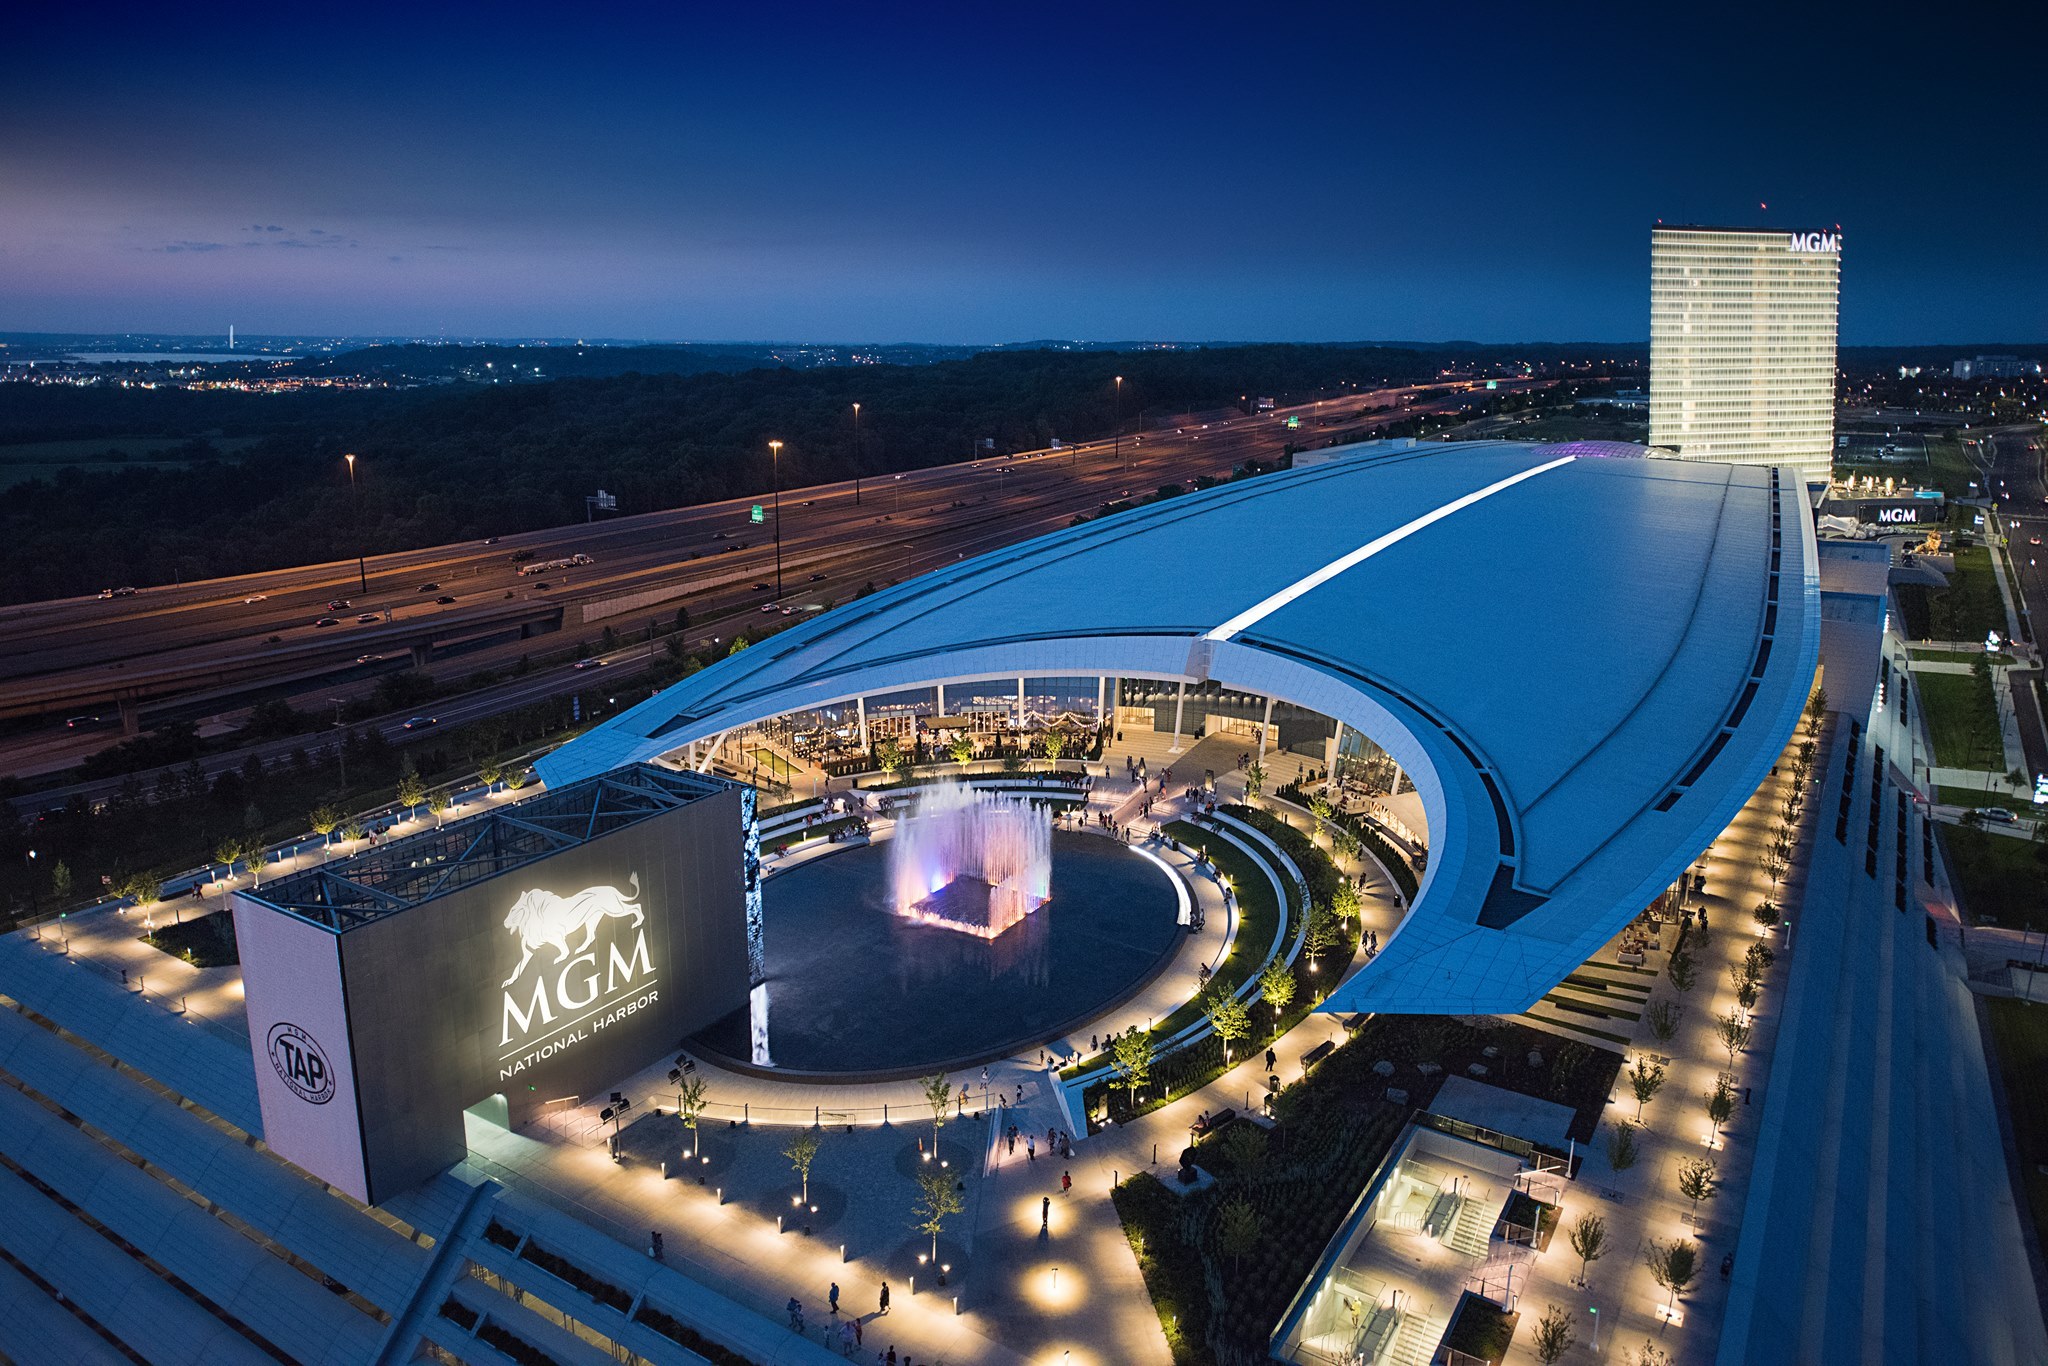 MGM National Harbor saw a record year with $52 million in revenue